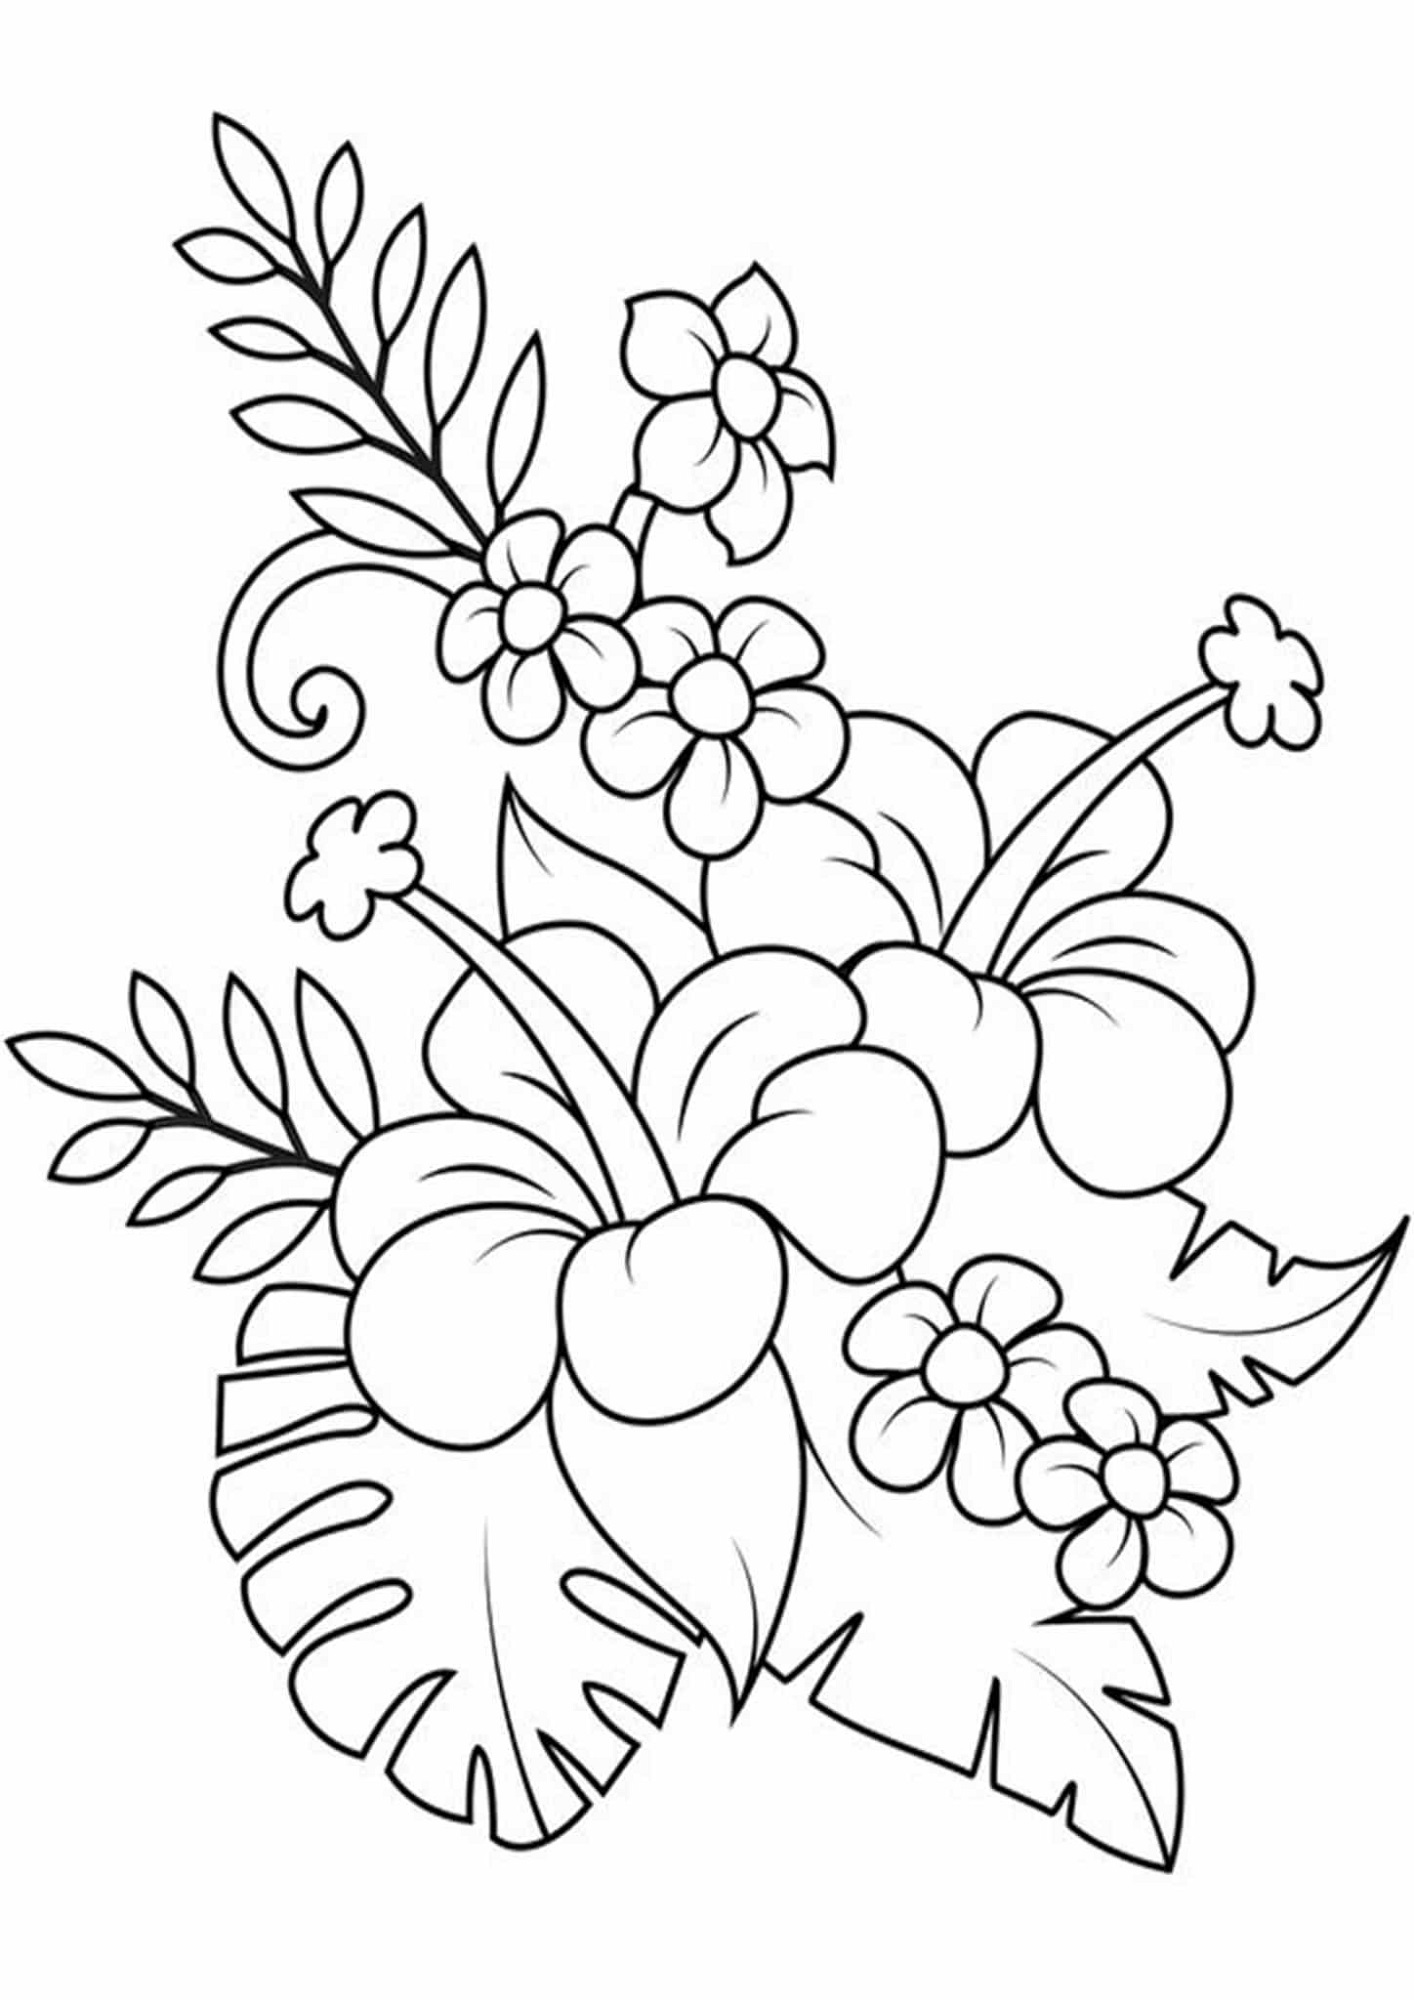 Easy Free Printable Flower Coloring Pages